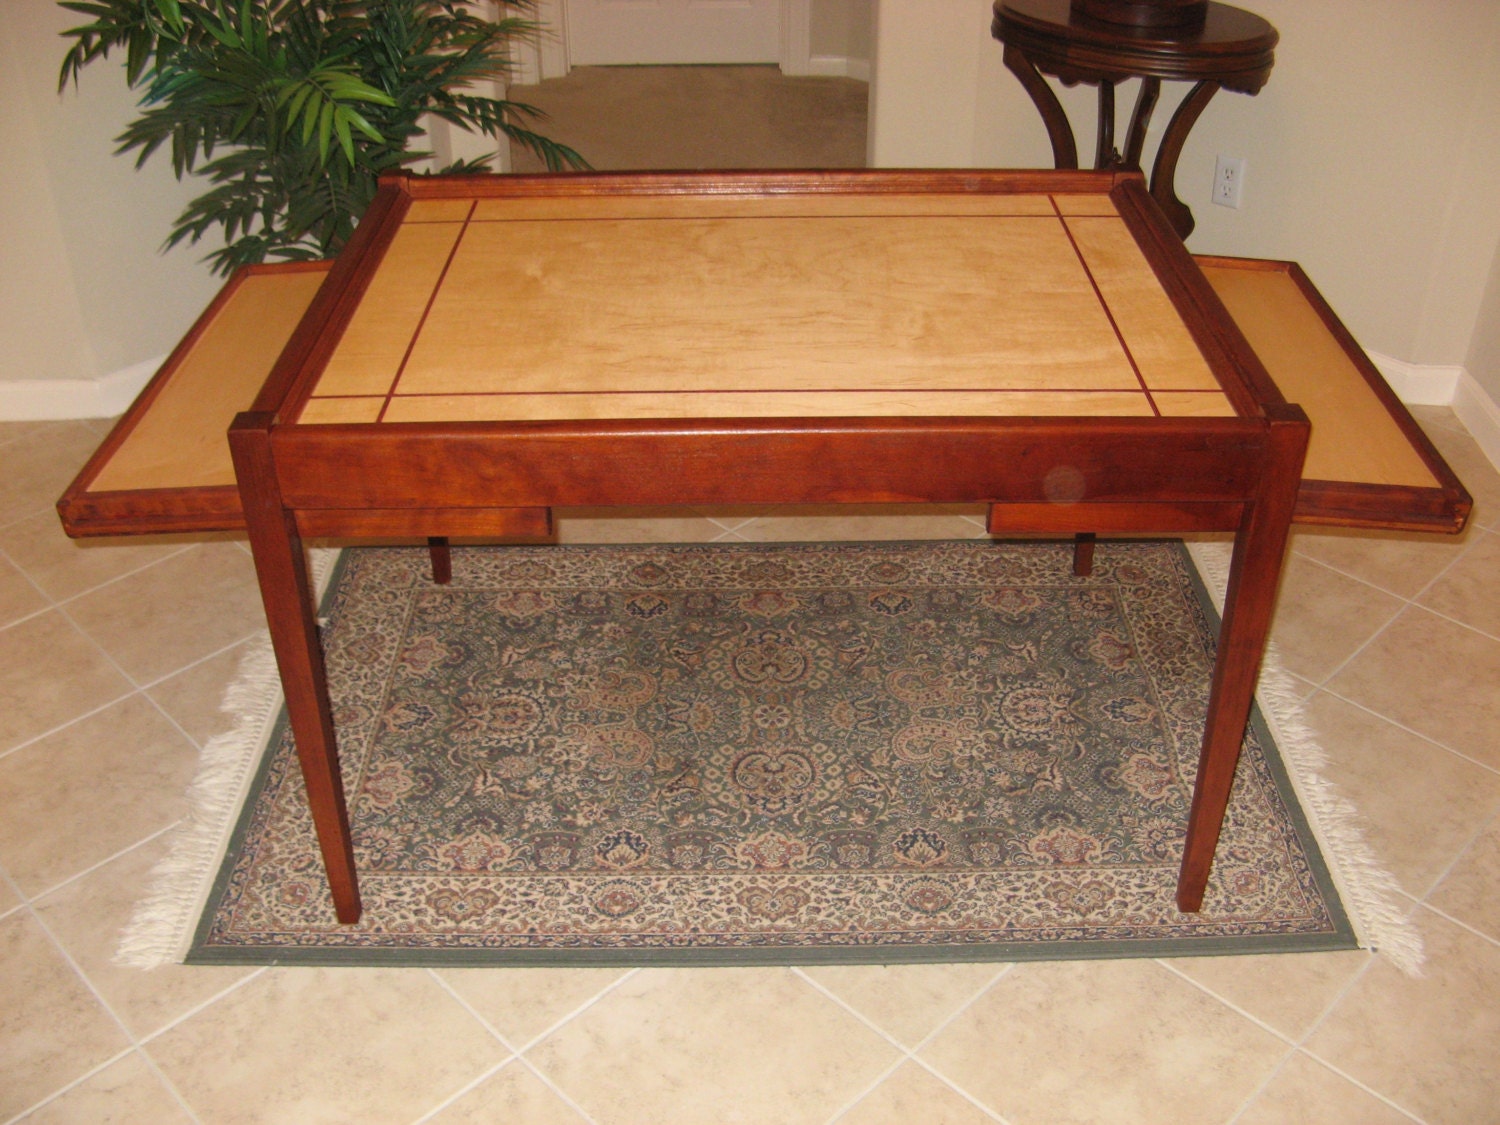 Jigsaw puzzle table with additional legroom